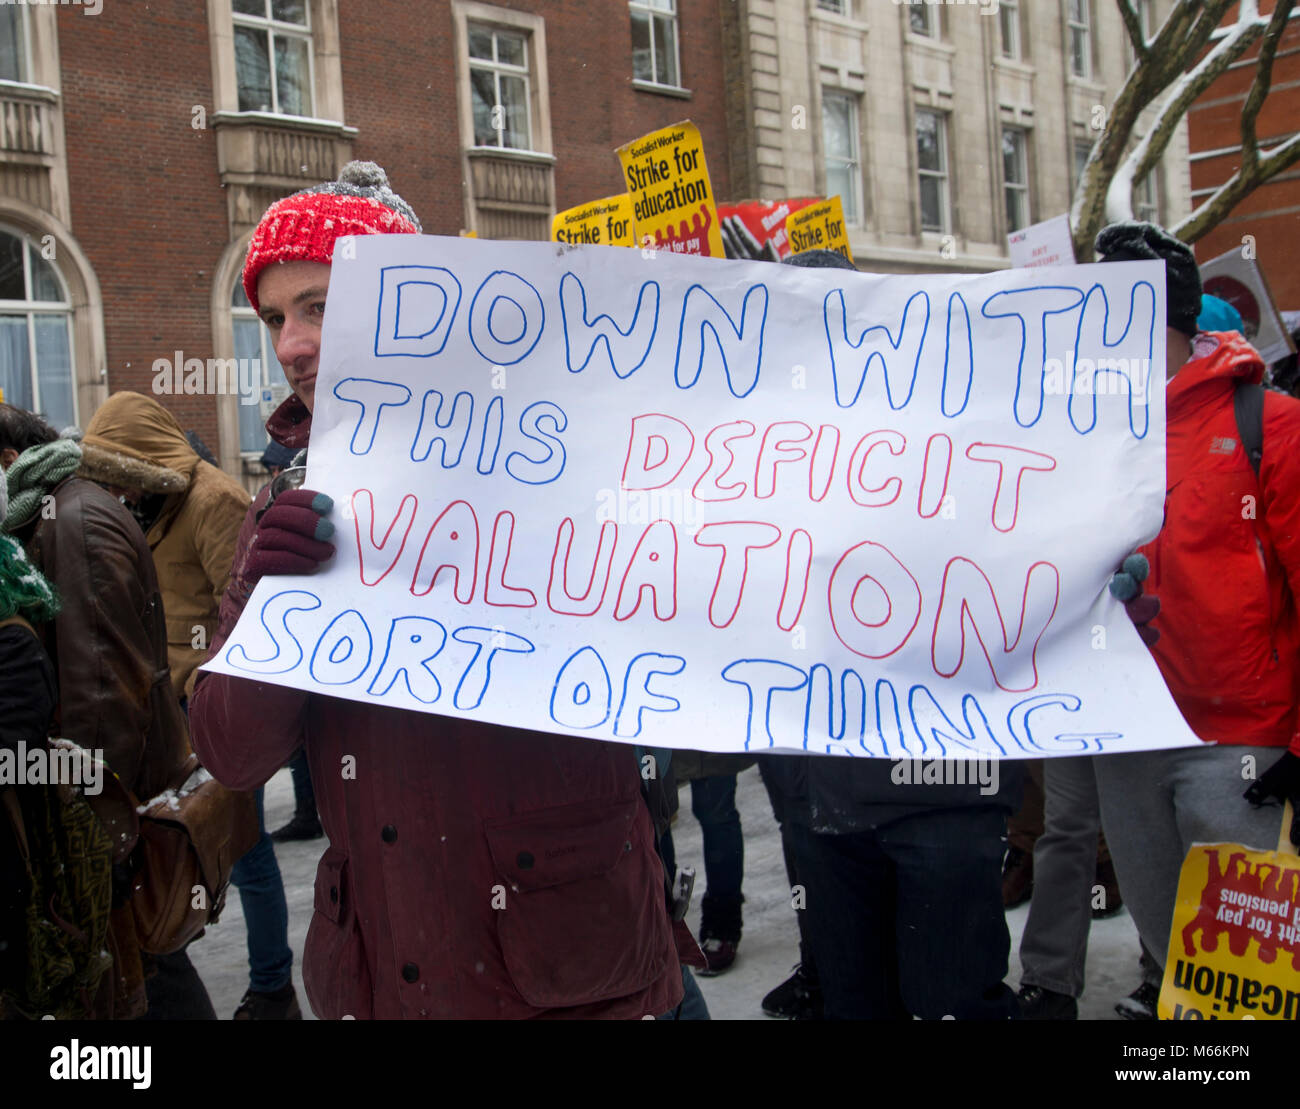 University staff and students demonstrated in Central London . A protester holds a poster saying 'Down with deficit valuation' Stock Photo